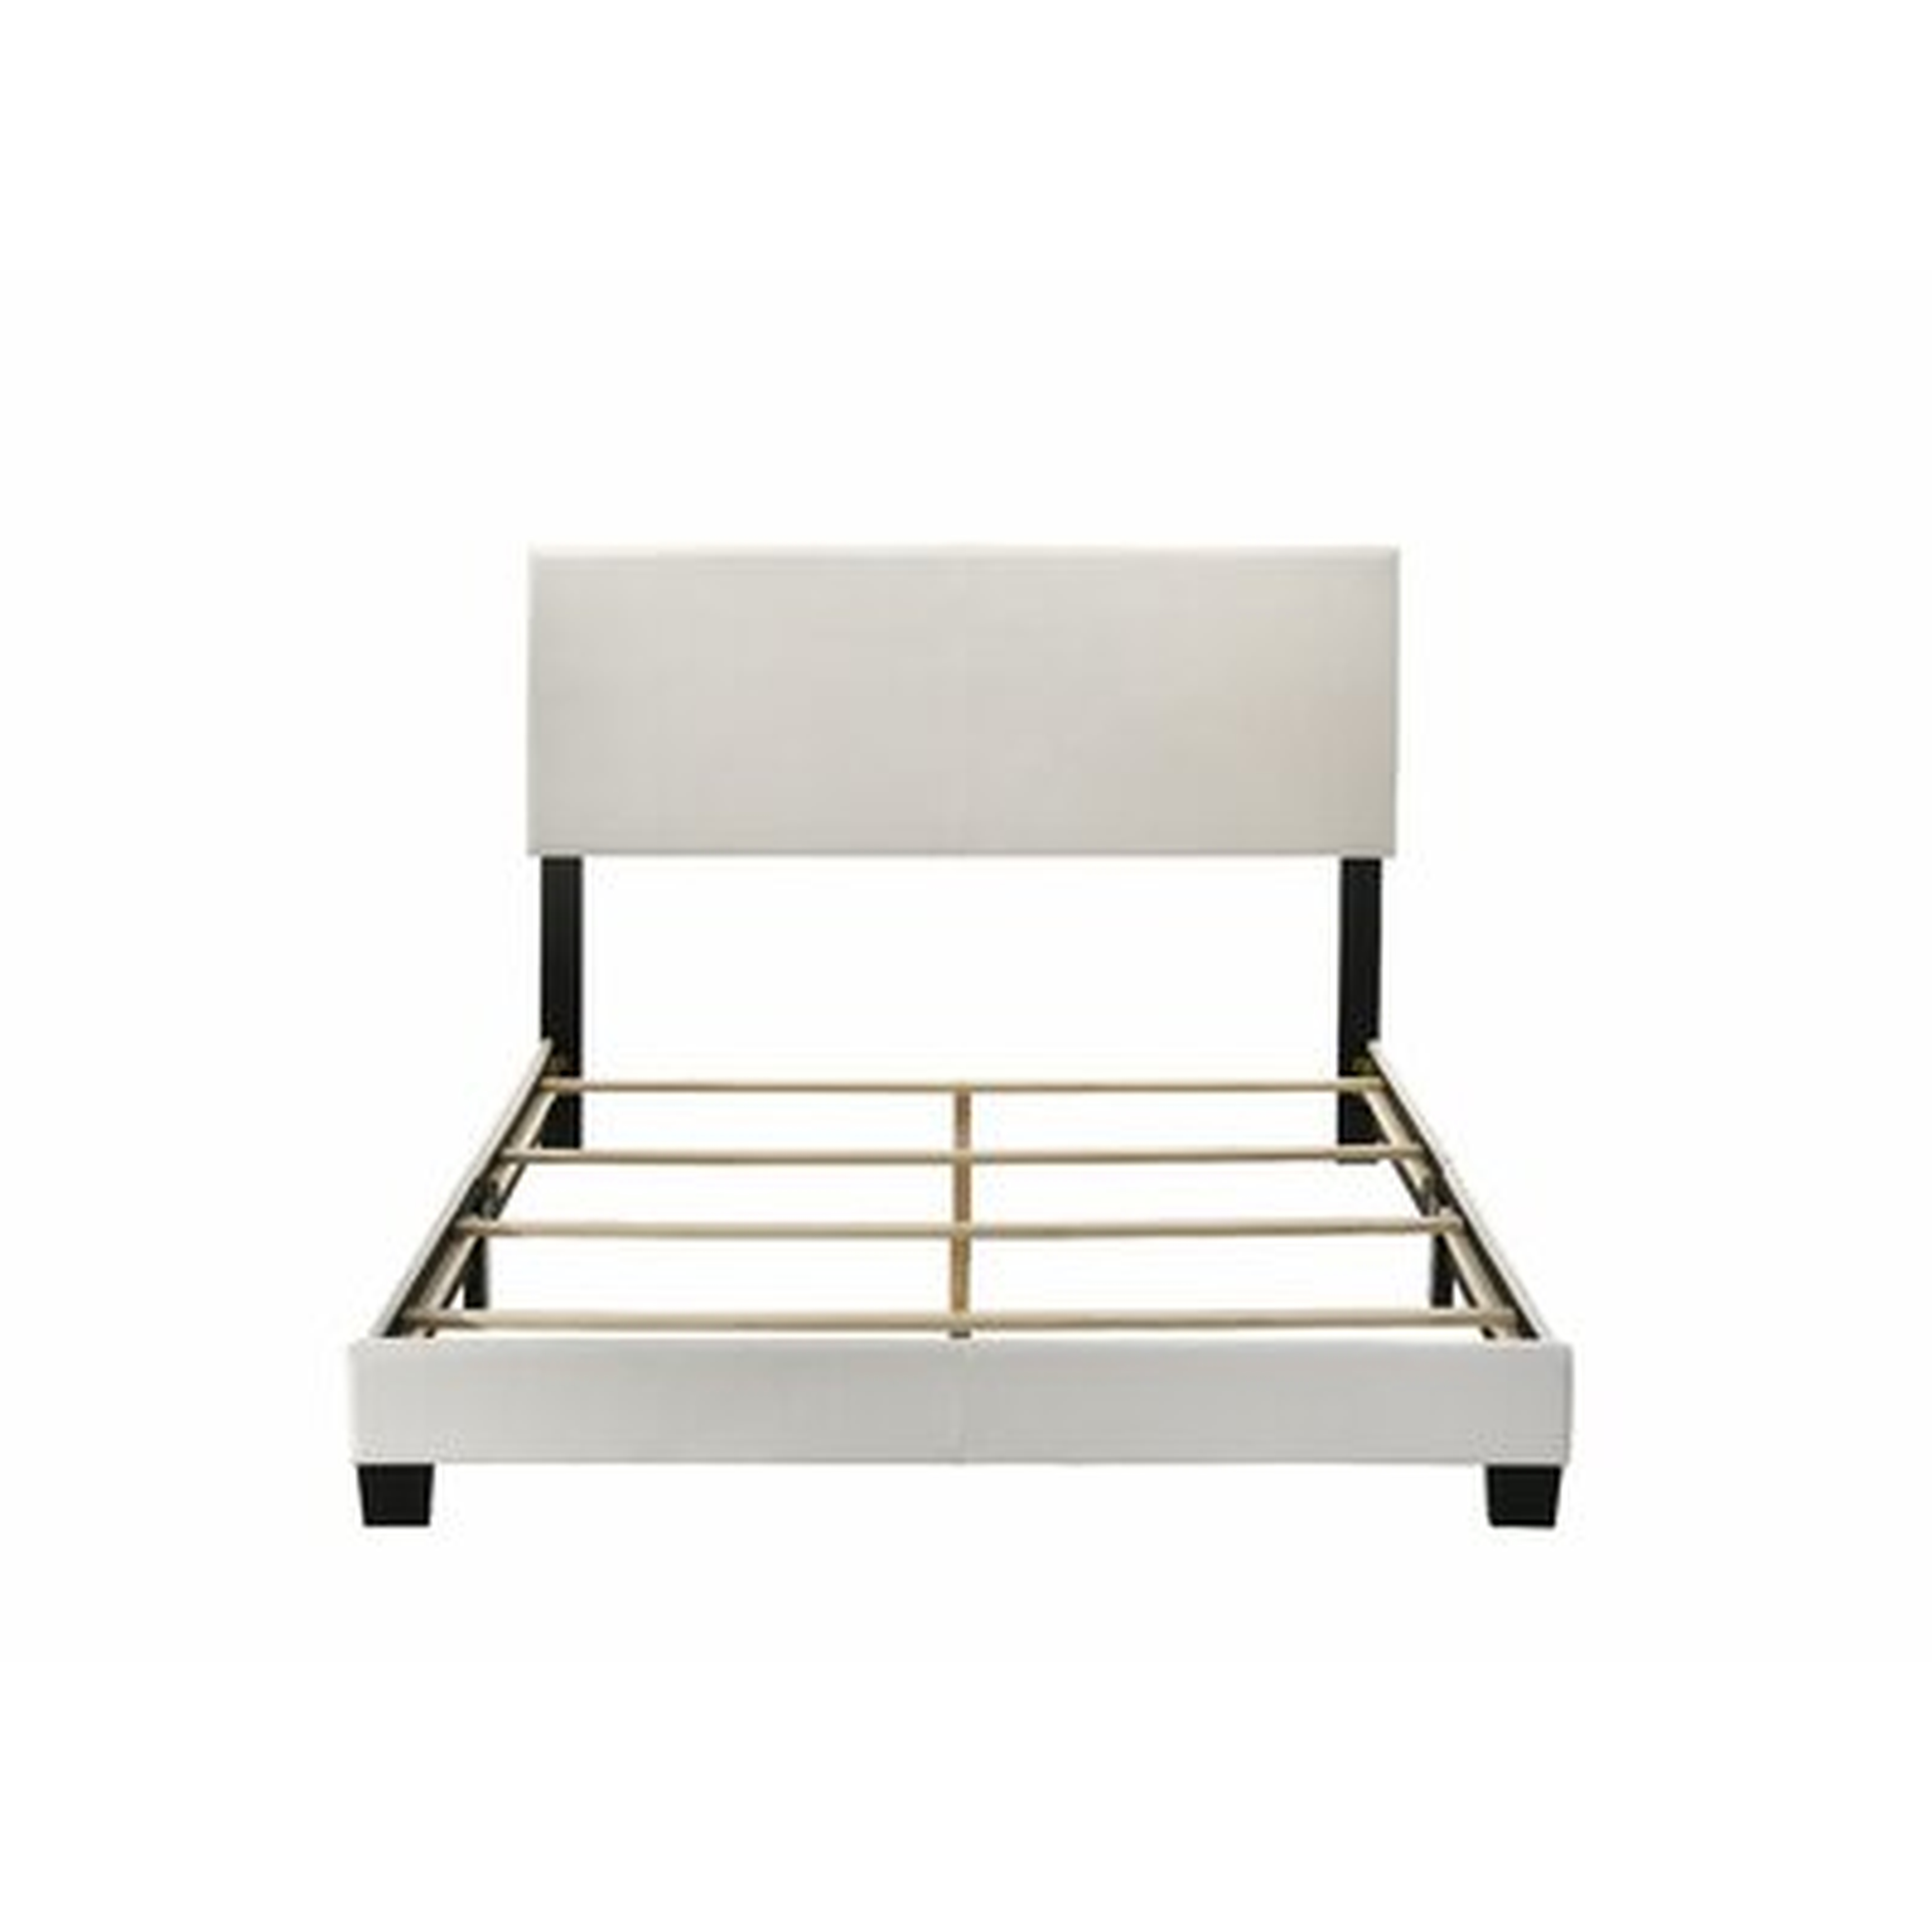 Pu Queen Bed, Platform Bed, Double Bed, Modern White Double Bed (Bed Frame With Cushion) - Wayfair